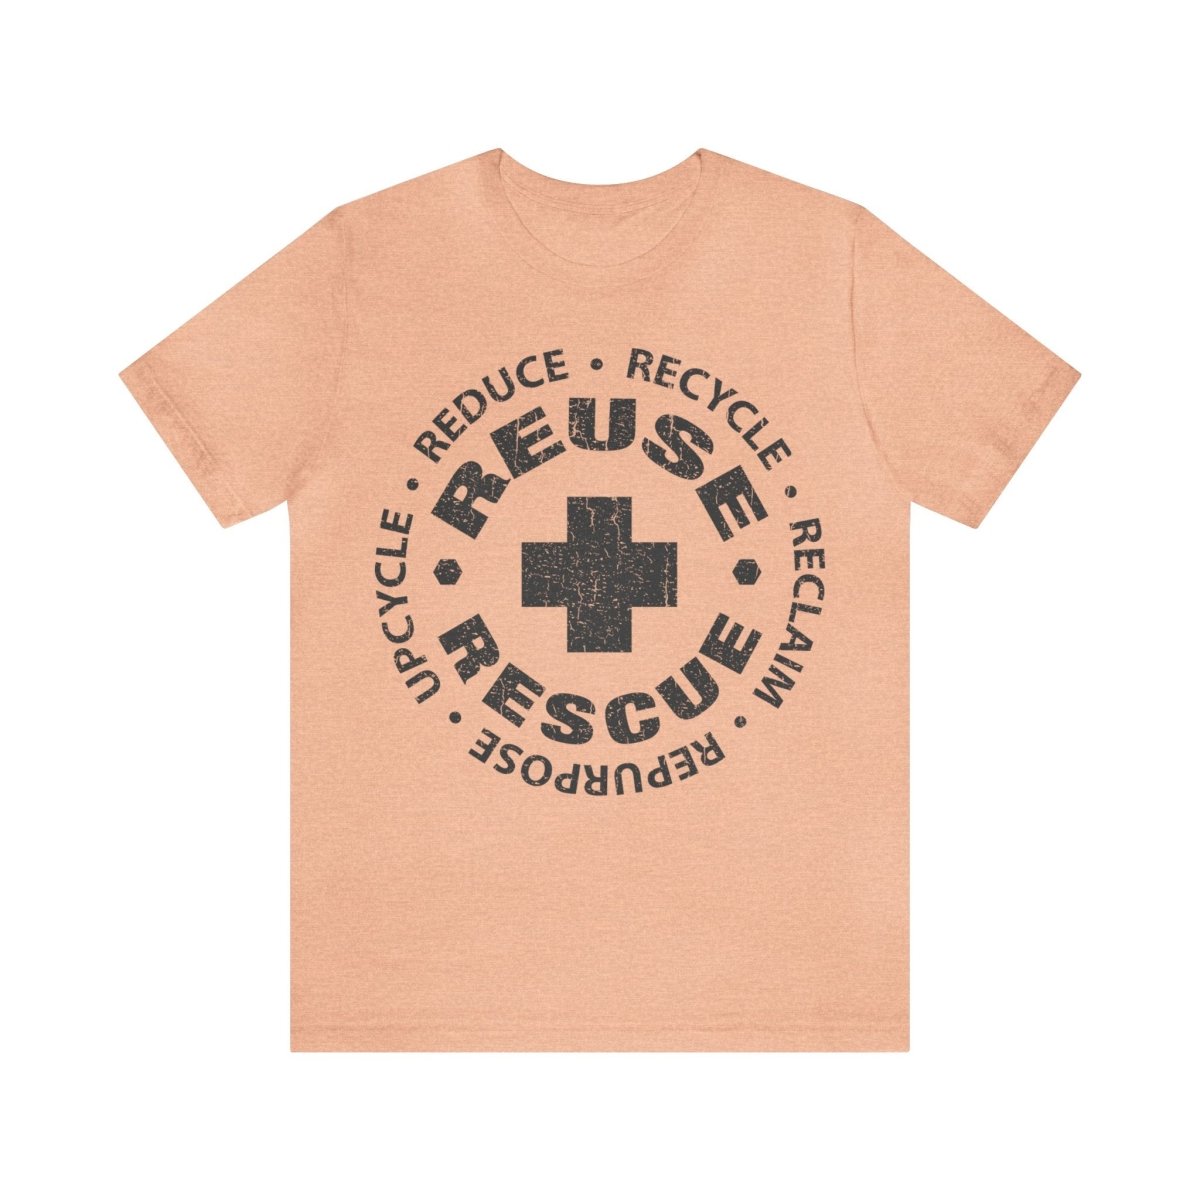 Reuse Rescue Premium T-Shirt, Recycle, Remake, Redo, Reduce, DIY, Reclaim, Upcycle, Self Reliance, Fix It